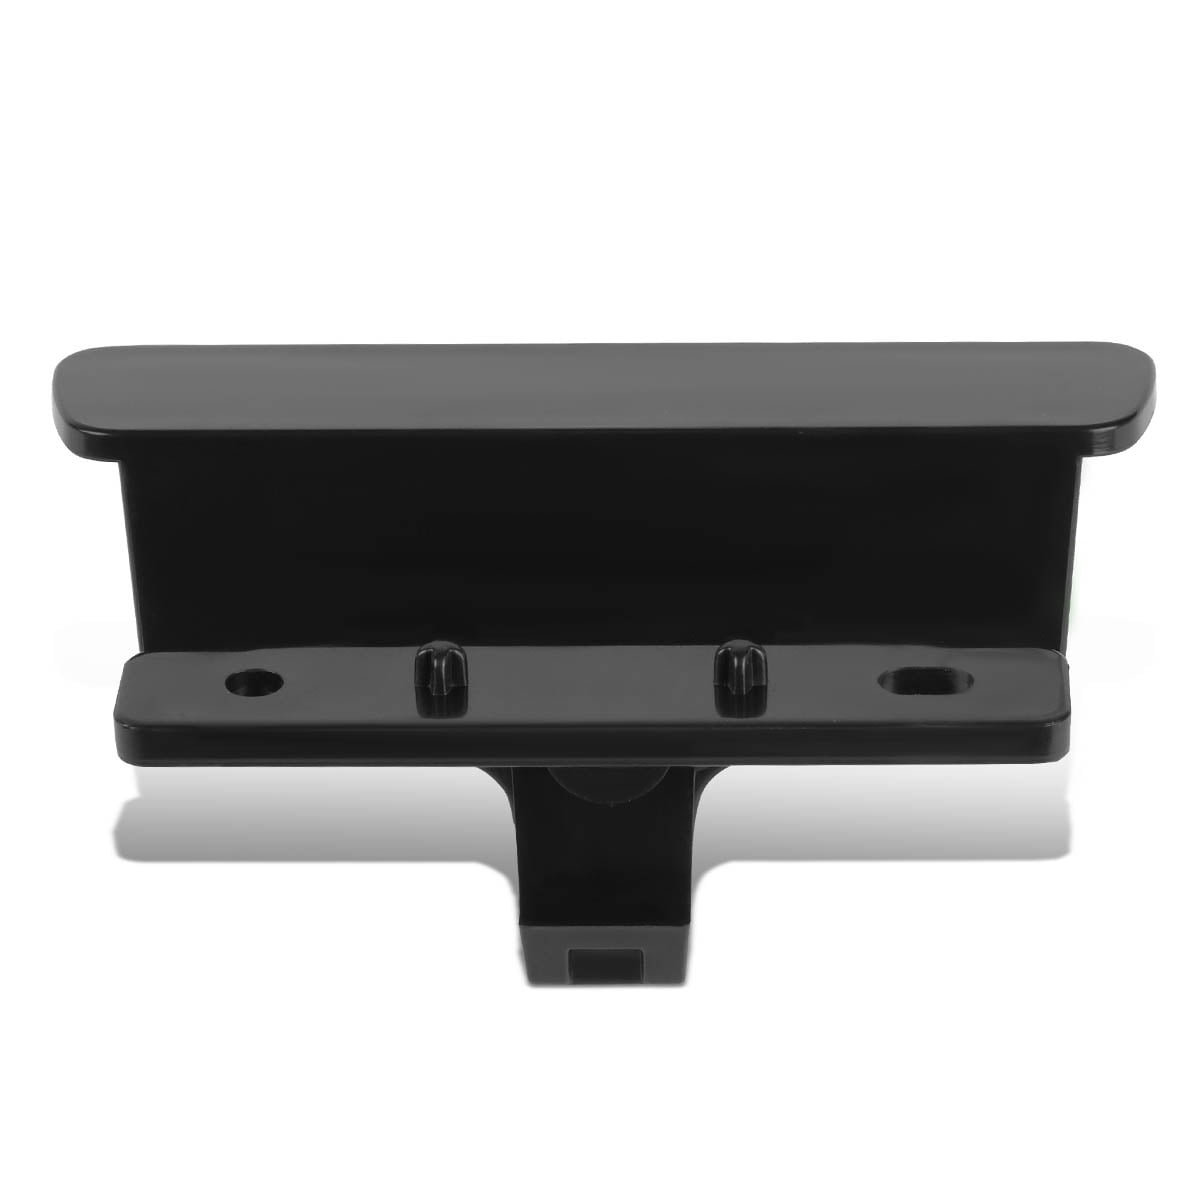 Pack of 1 DEF Center Console Armrest Lid Latch for 2007-2014 Chevy Silverado,Avalanche,Suburban,Tahoe,GMC,Sierra,Yukon,Escalade Replaces Part 20864151,20864153,20864154 